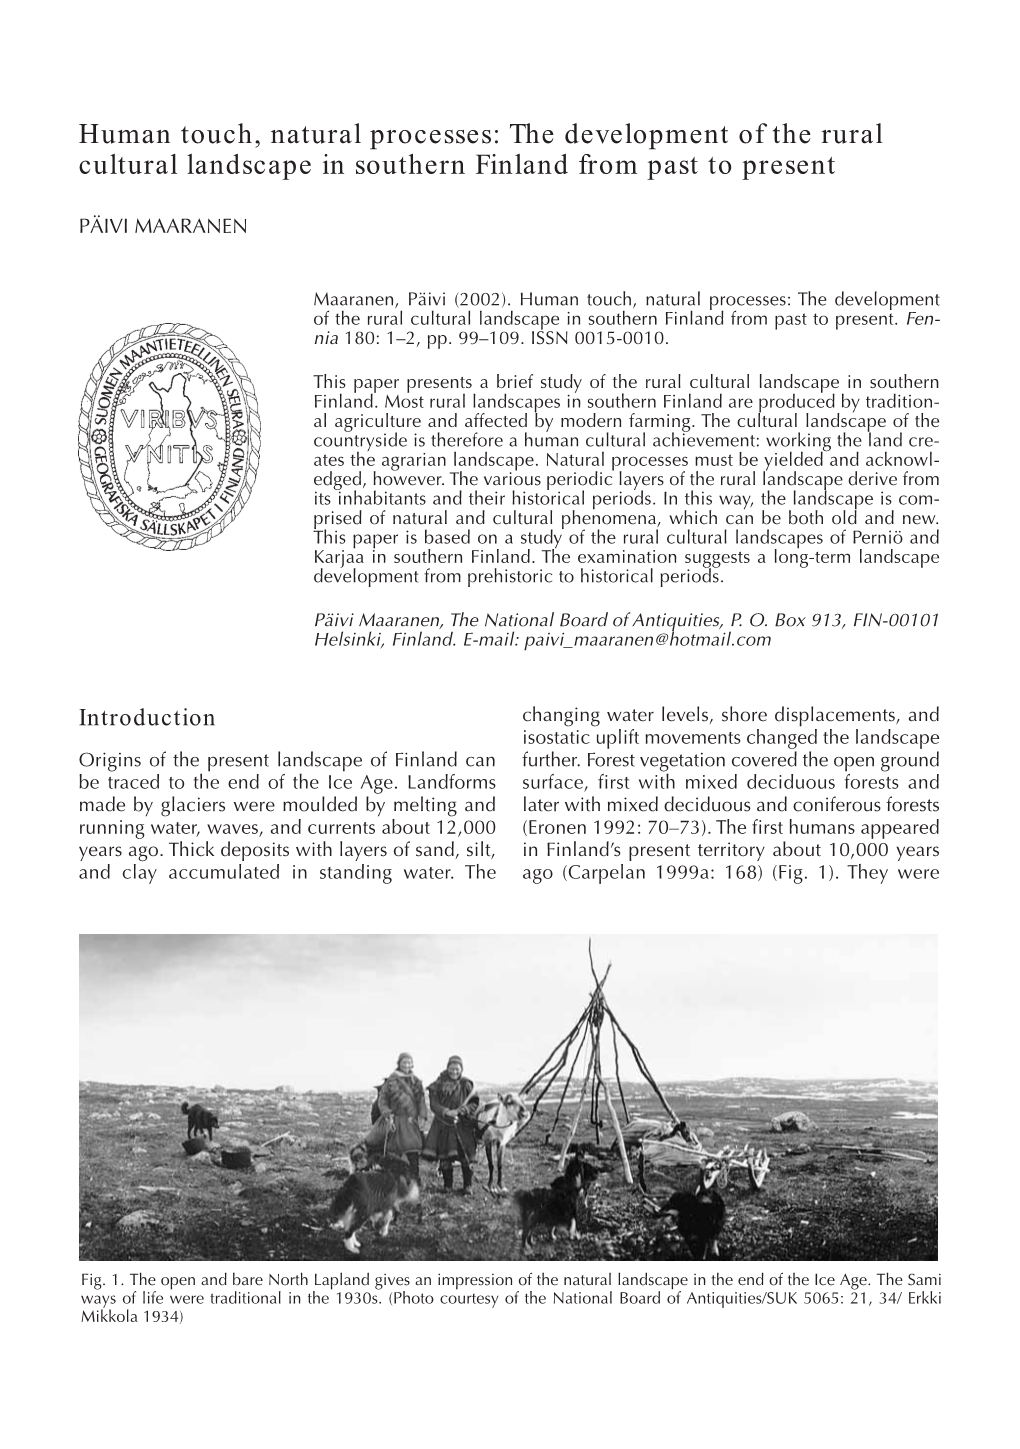 The Development of the Rural Cultural Landscape in Southern Finland from Past to Present